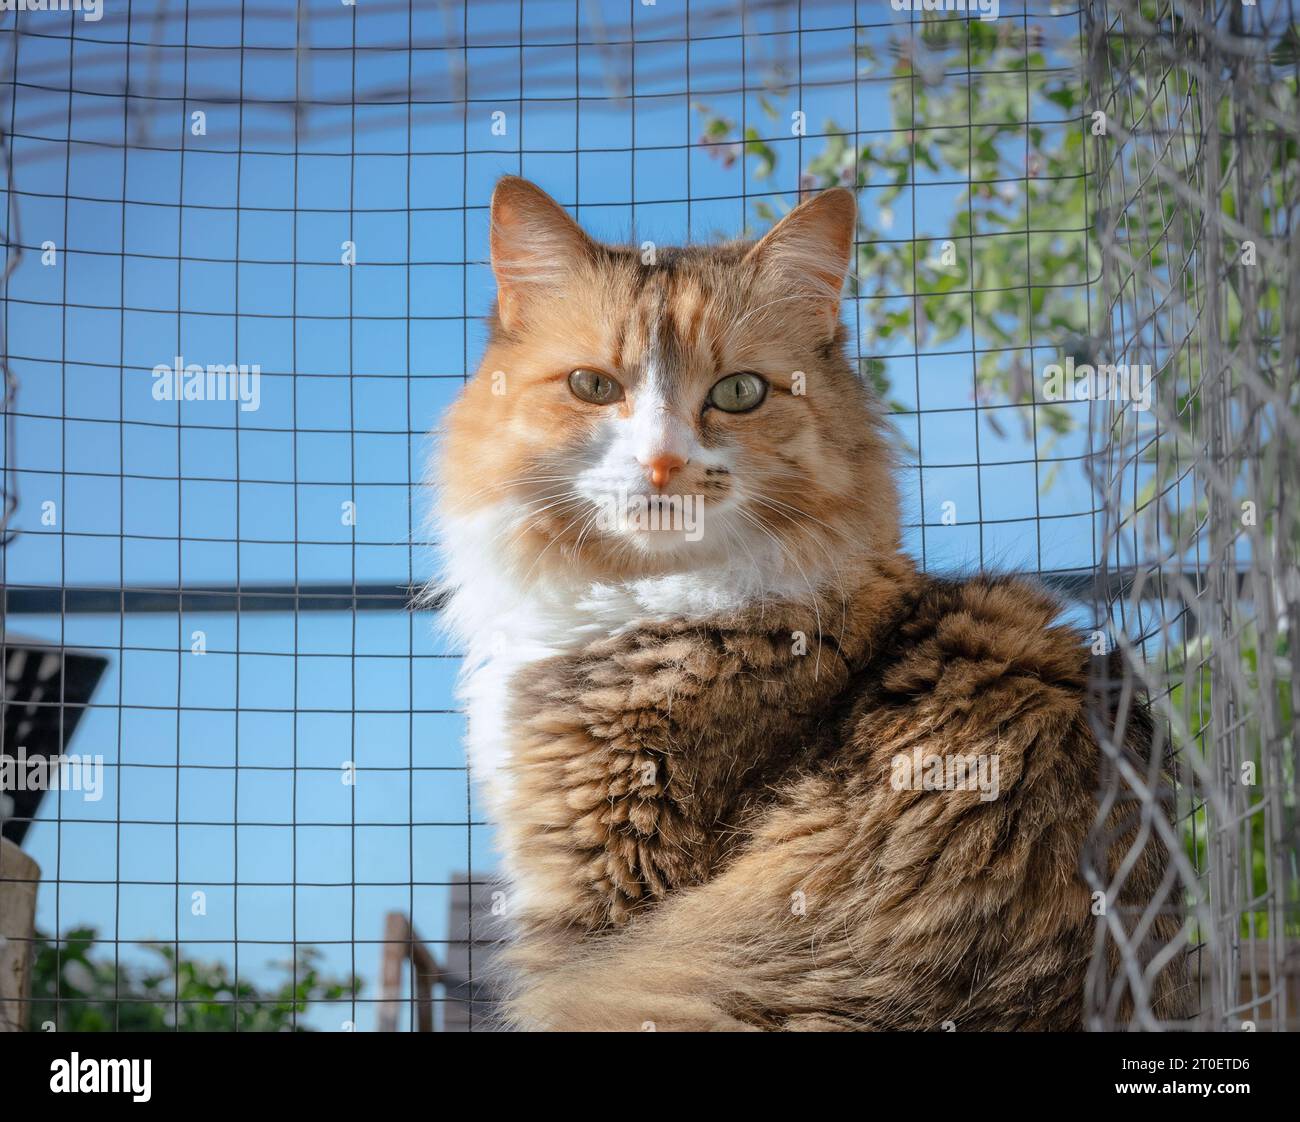 Cute cat in cation in roof garden patio looking at camera. Kitty sitting in wire mesh enclosure in front of defocused catmint plants. Female calico ca Stock Photo